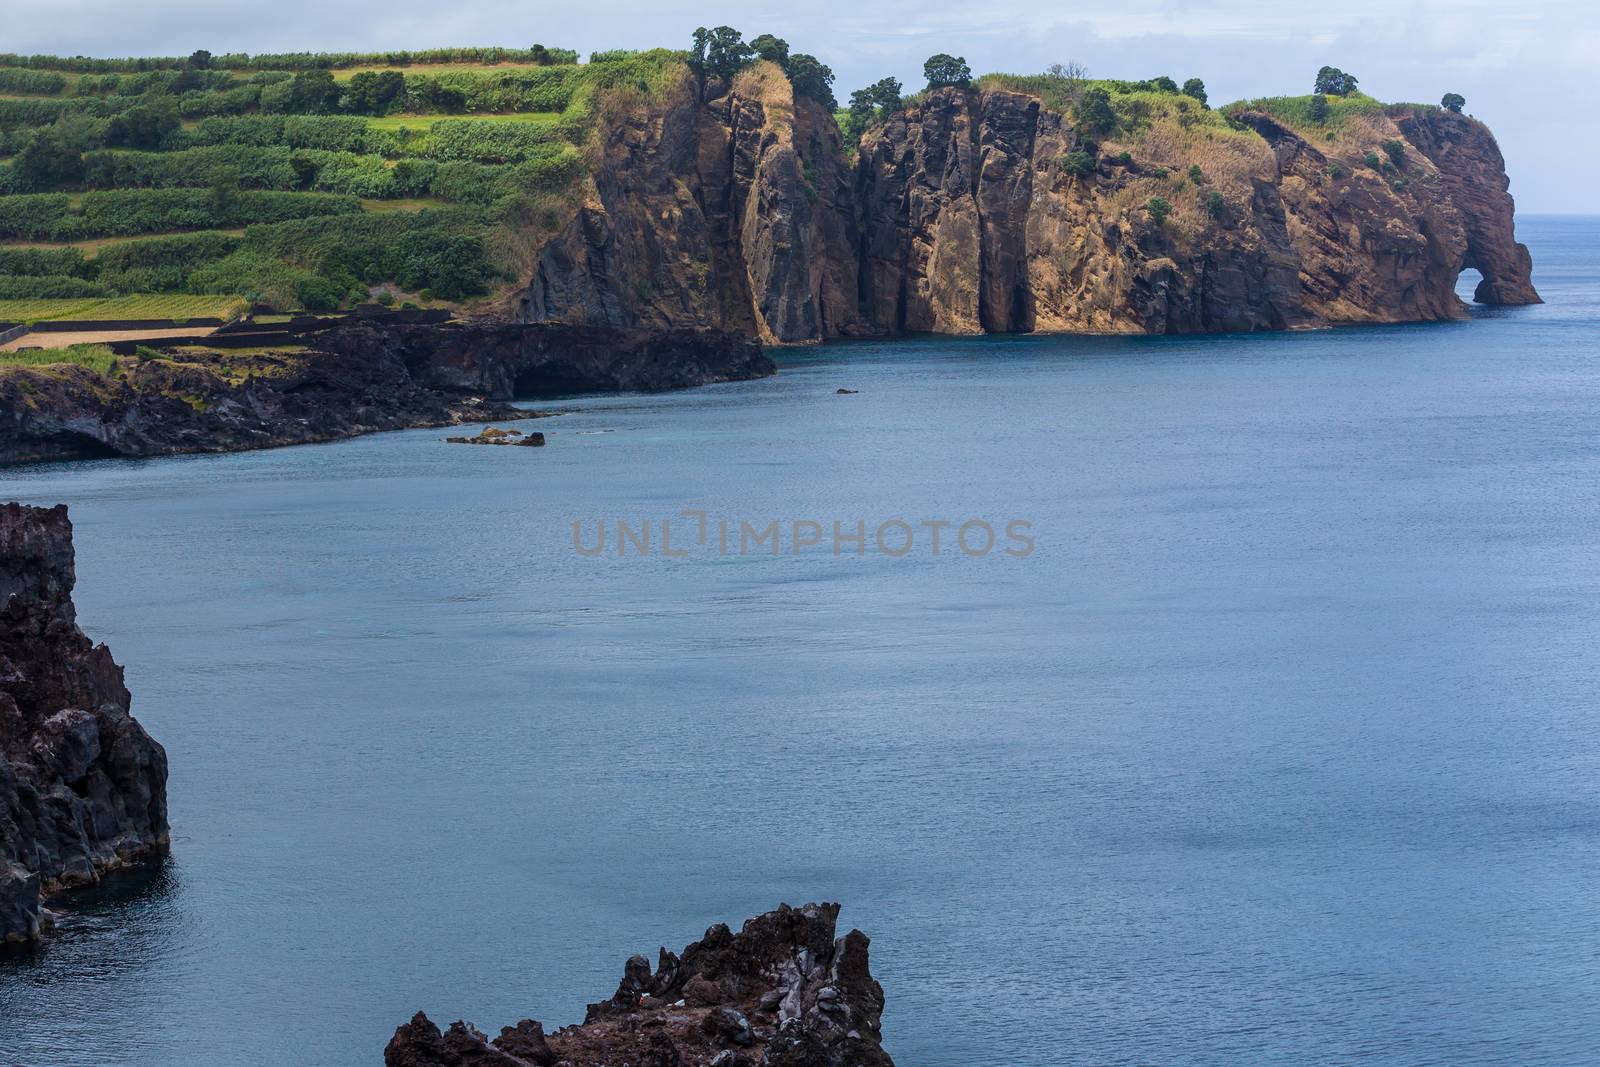 Elephant Rock. Photo taken in the beautiful island of S. Miguel, Azores, Portugal.